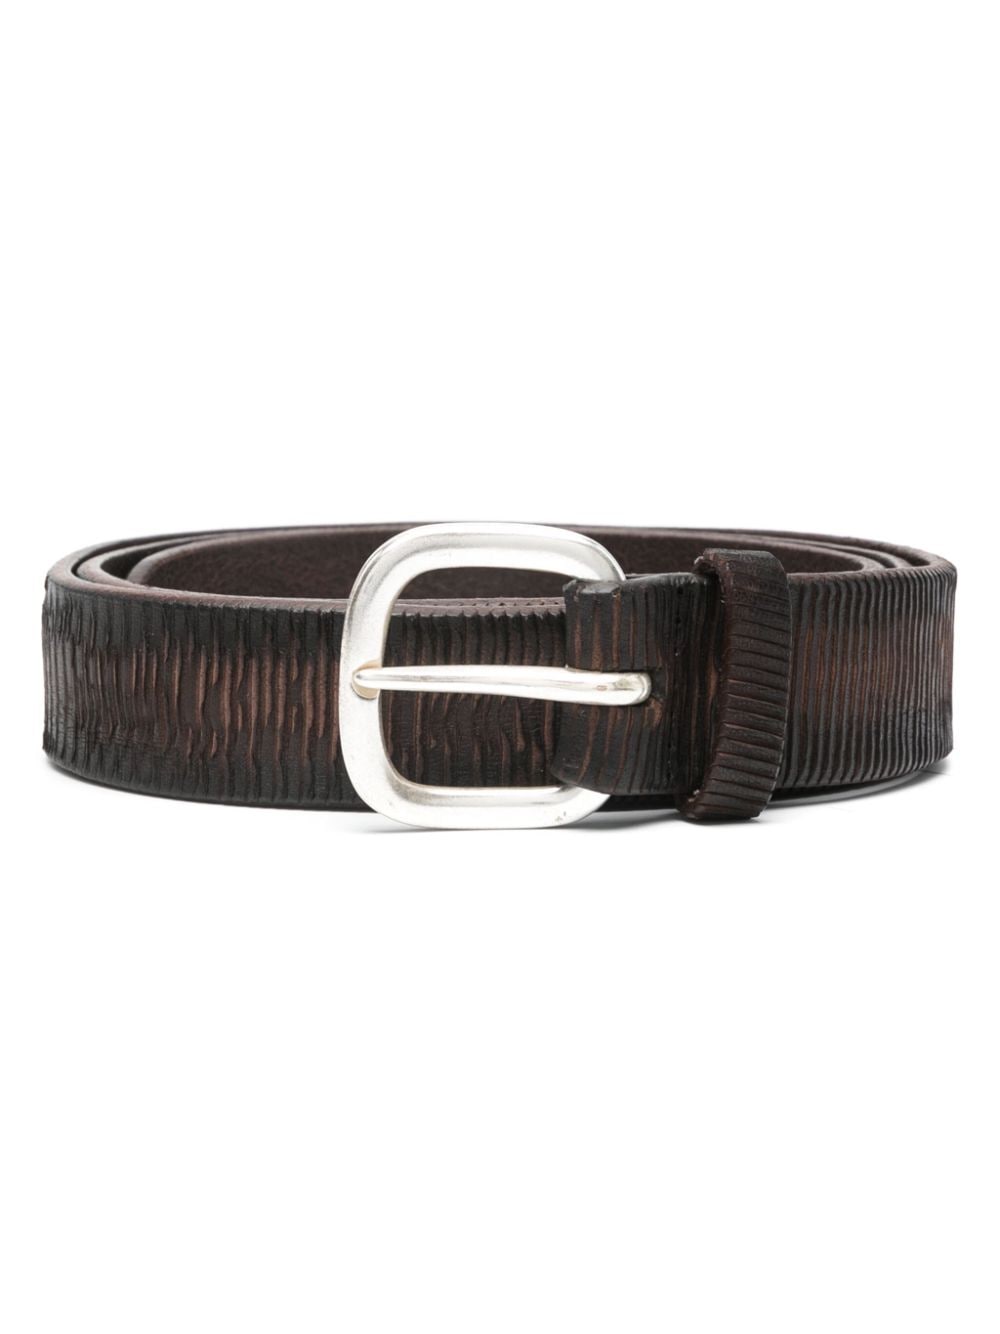 Orciani Blade leather belt - Brown von Orciani